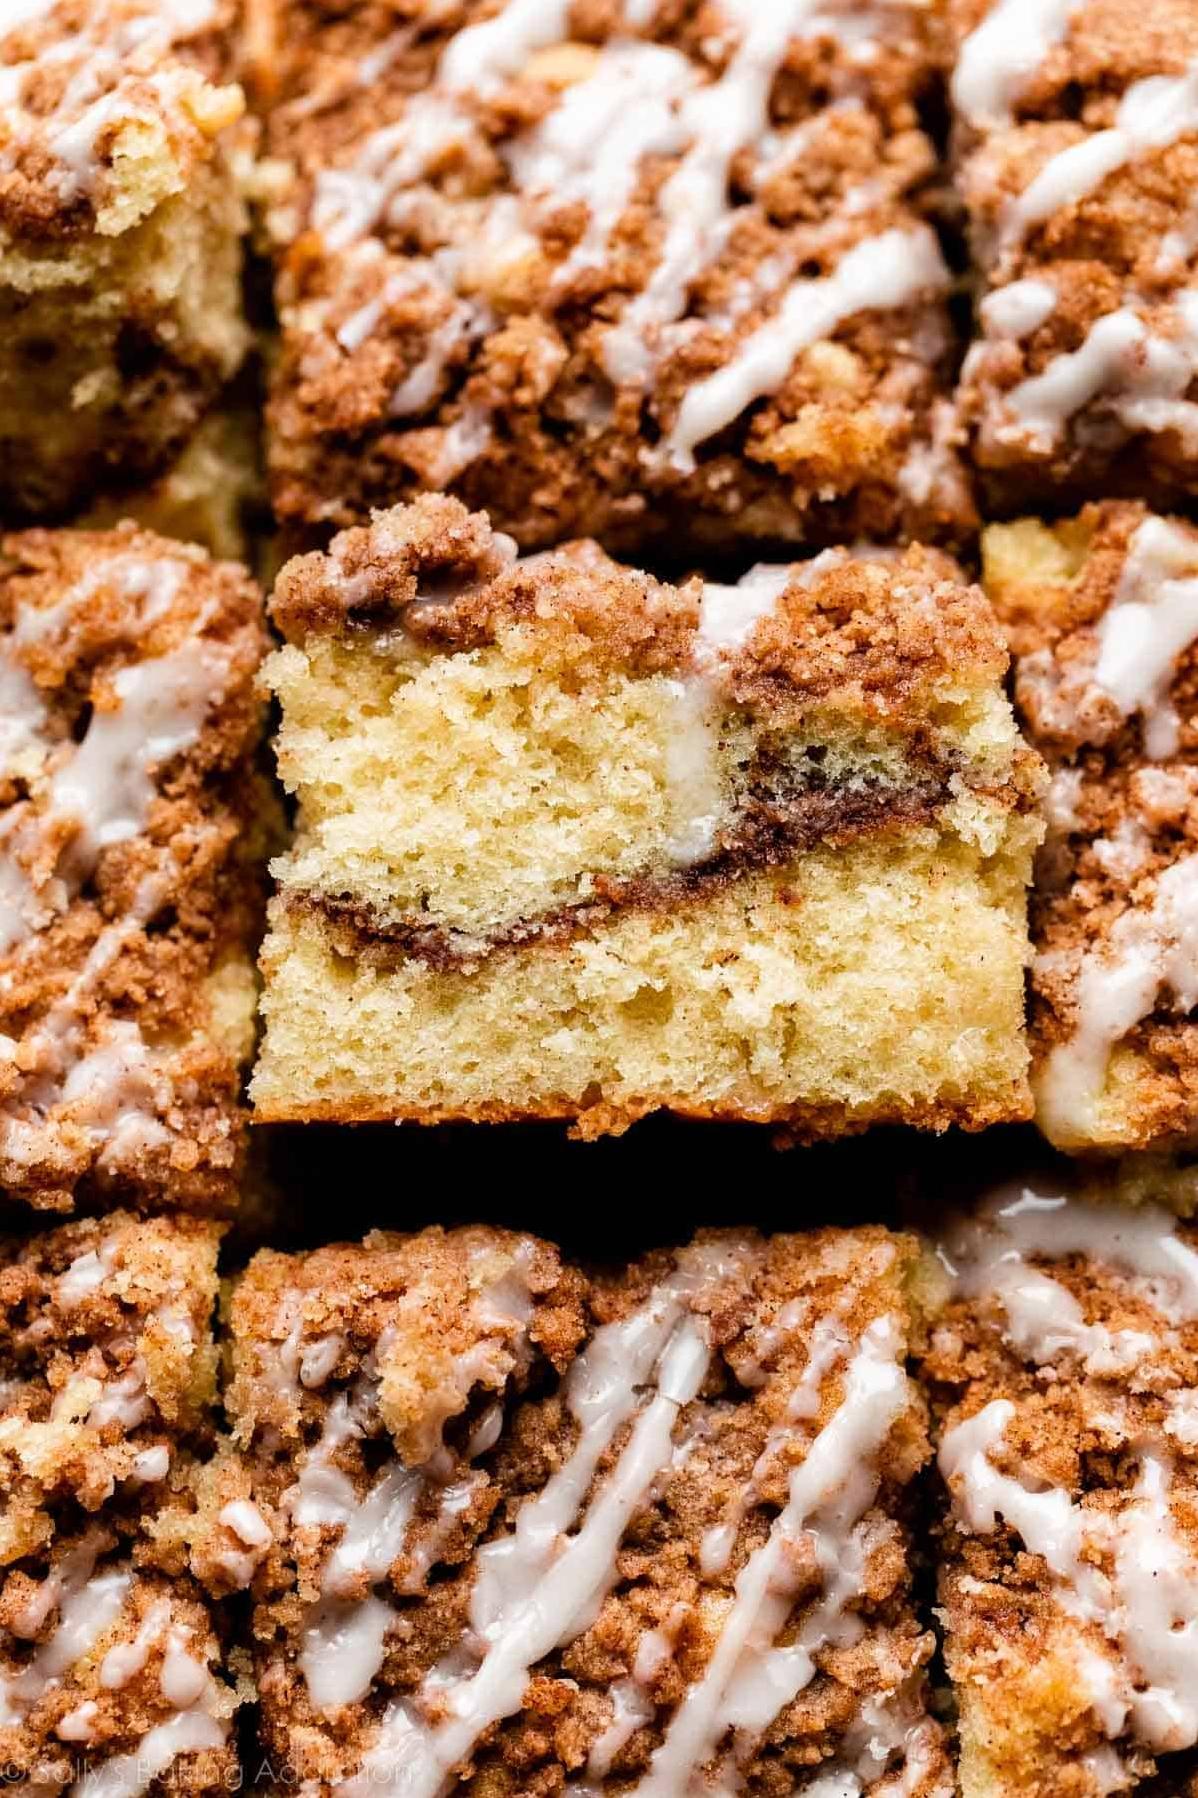  One bite and you'll be in coffee cake heaven.